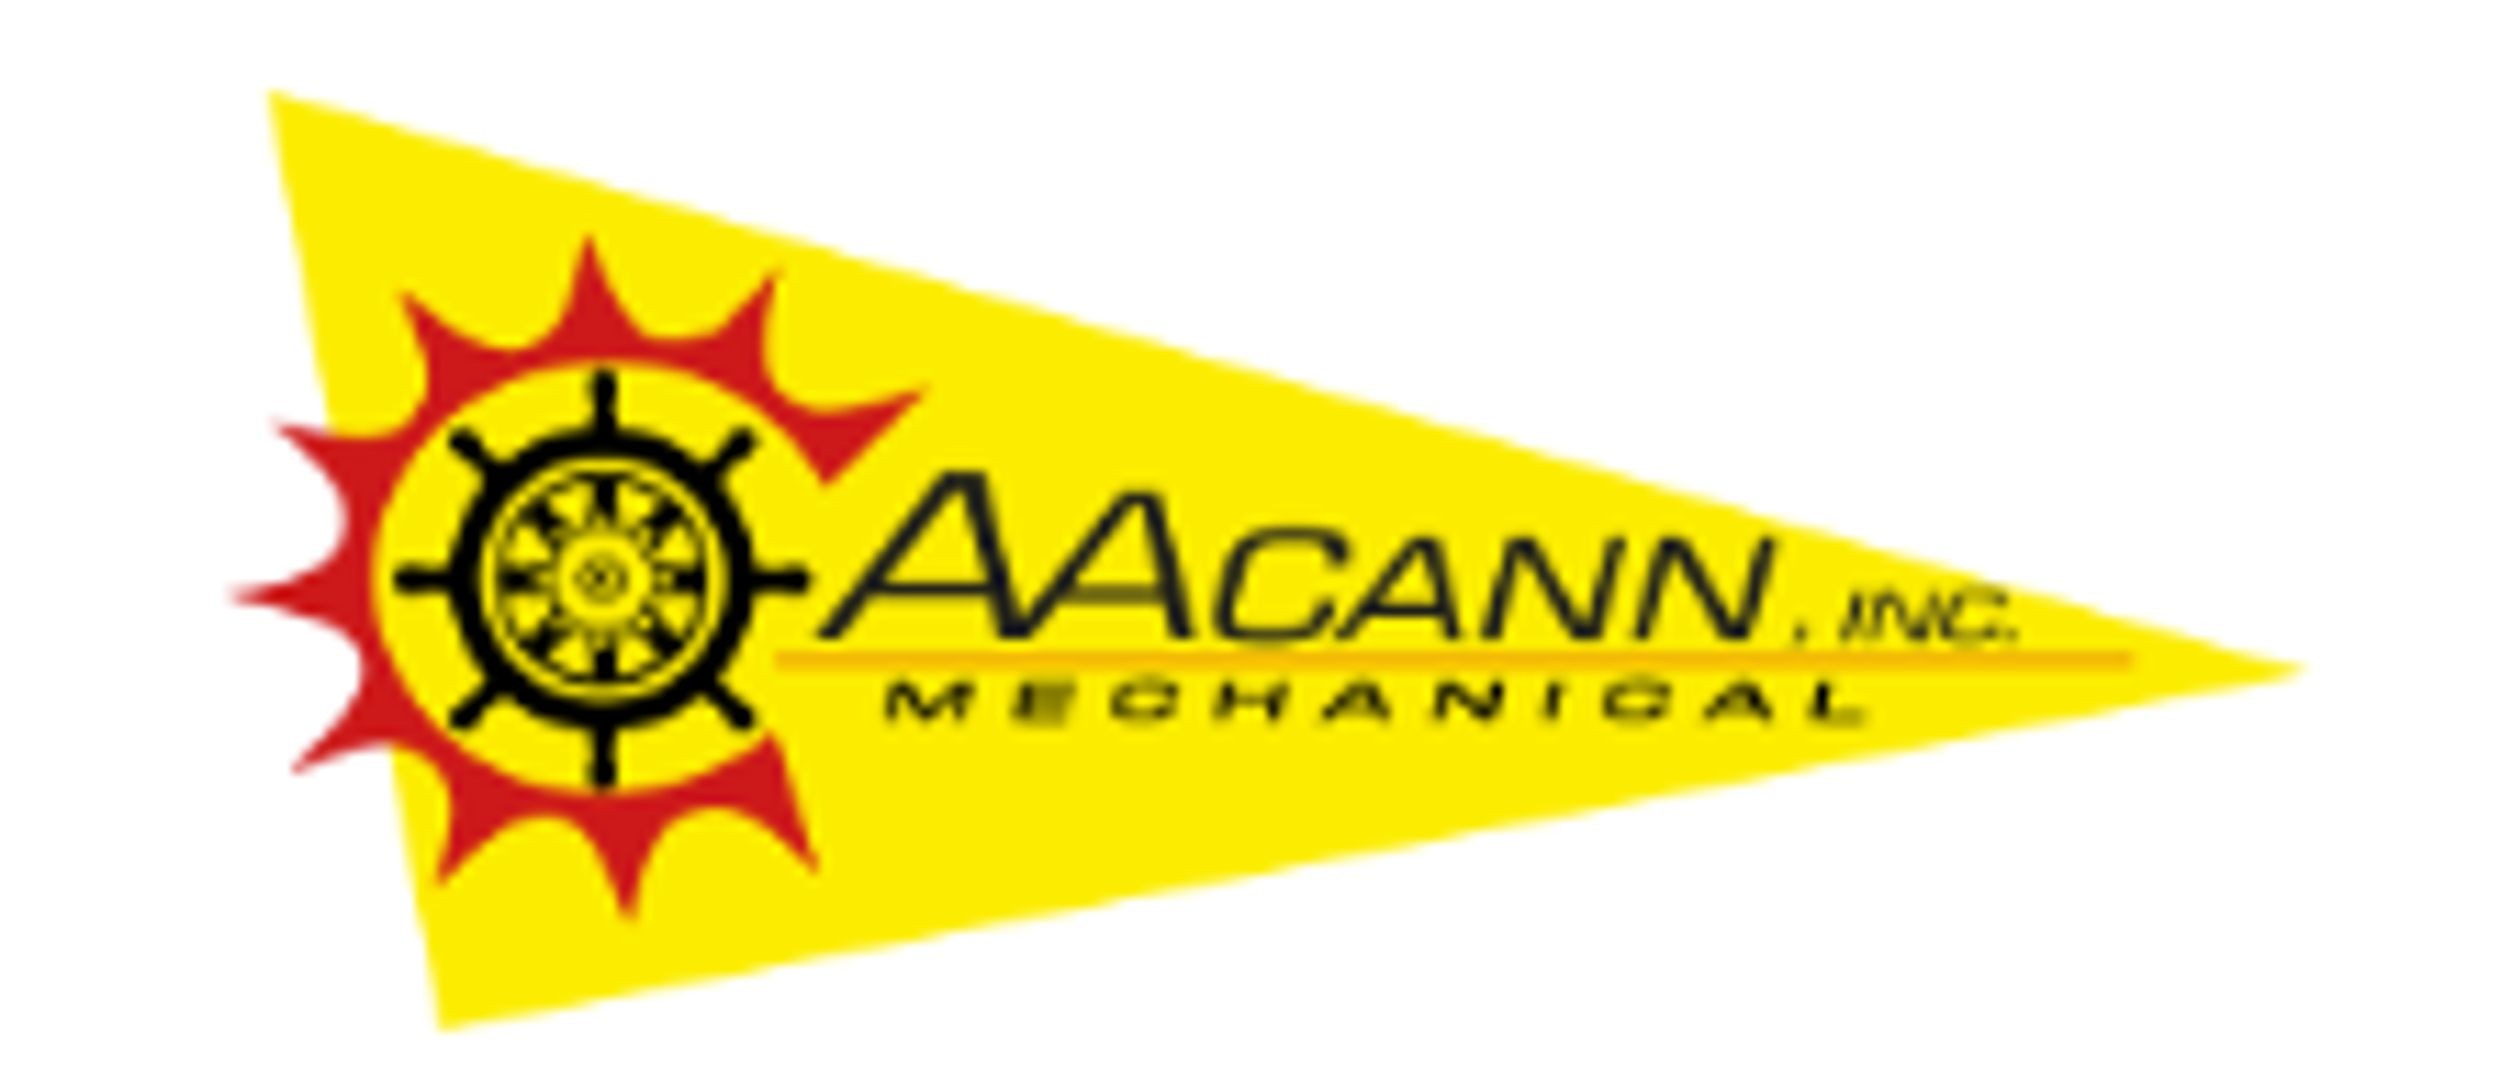 Aacann Mechanical Profile Picture